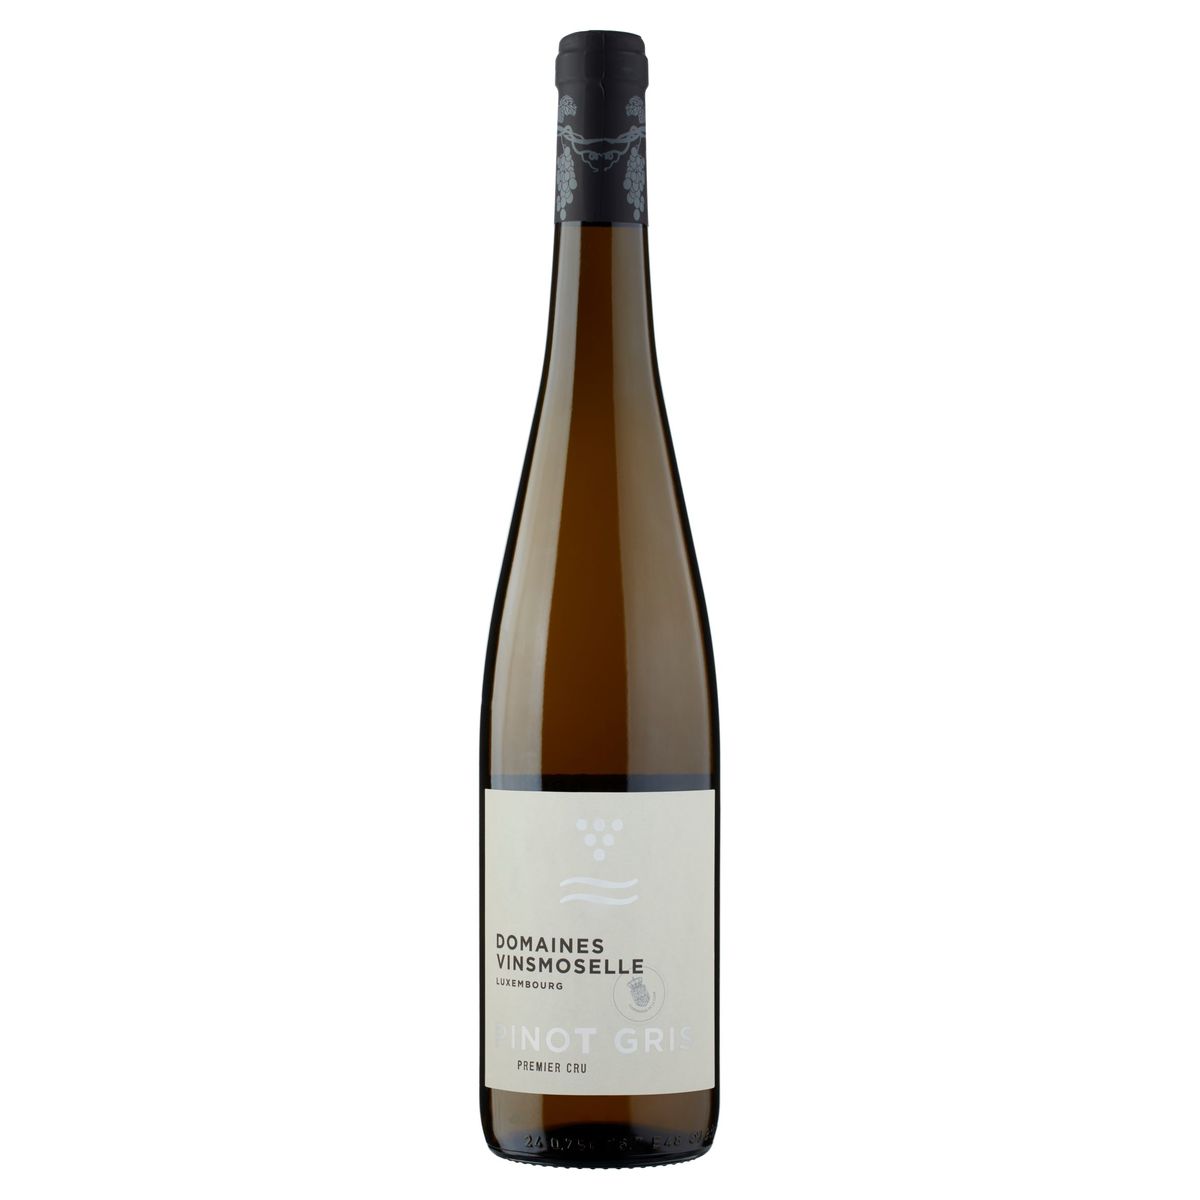 Luxemburg Domaines Vinsmoselle Pinot Gris 75 cl